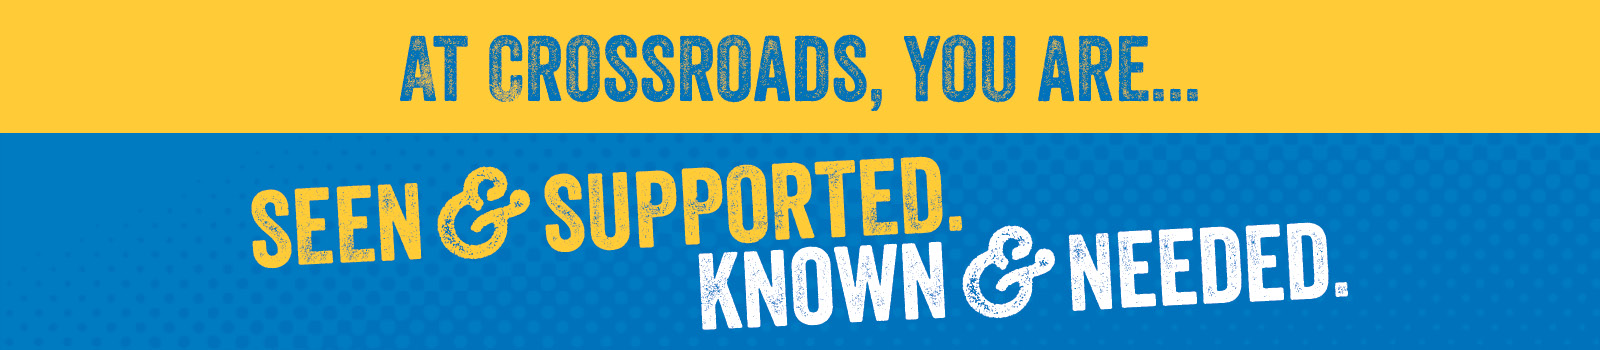 At Crossroads, you are... Seen & Supported. Known & Needed.